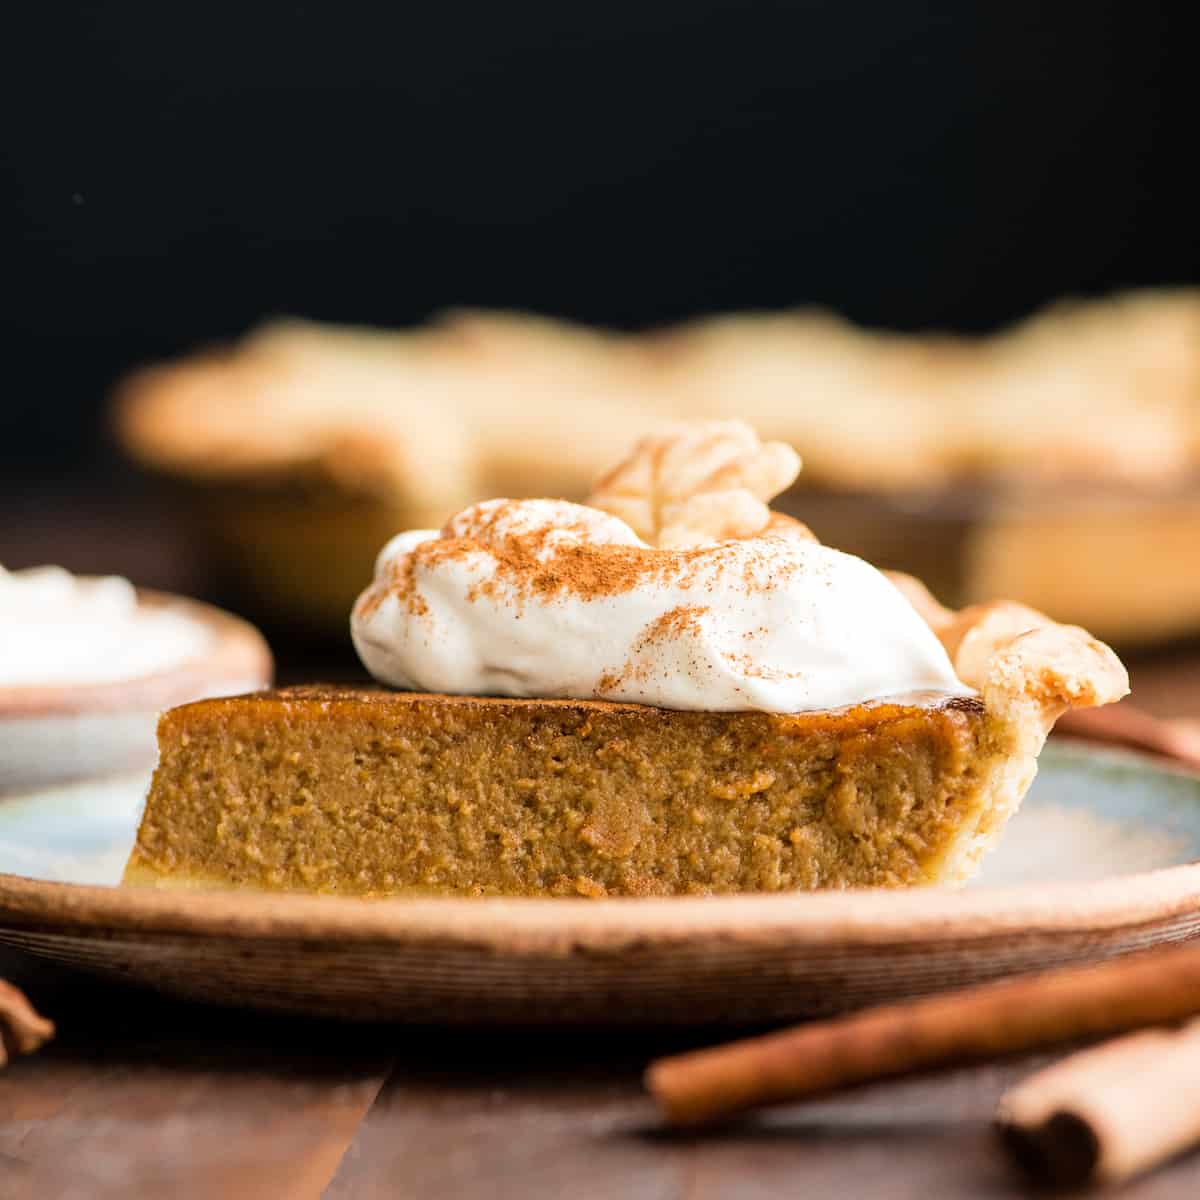 This Homemade Dairy-Free Pumpkin Pie recipe is seriously delicious!  This coconut milk pumpkin pie is creamy, perfectly sweet and loaded with cozy fall spices - a must-make Thanksgiving dessert.